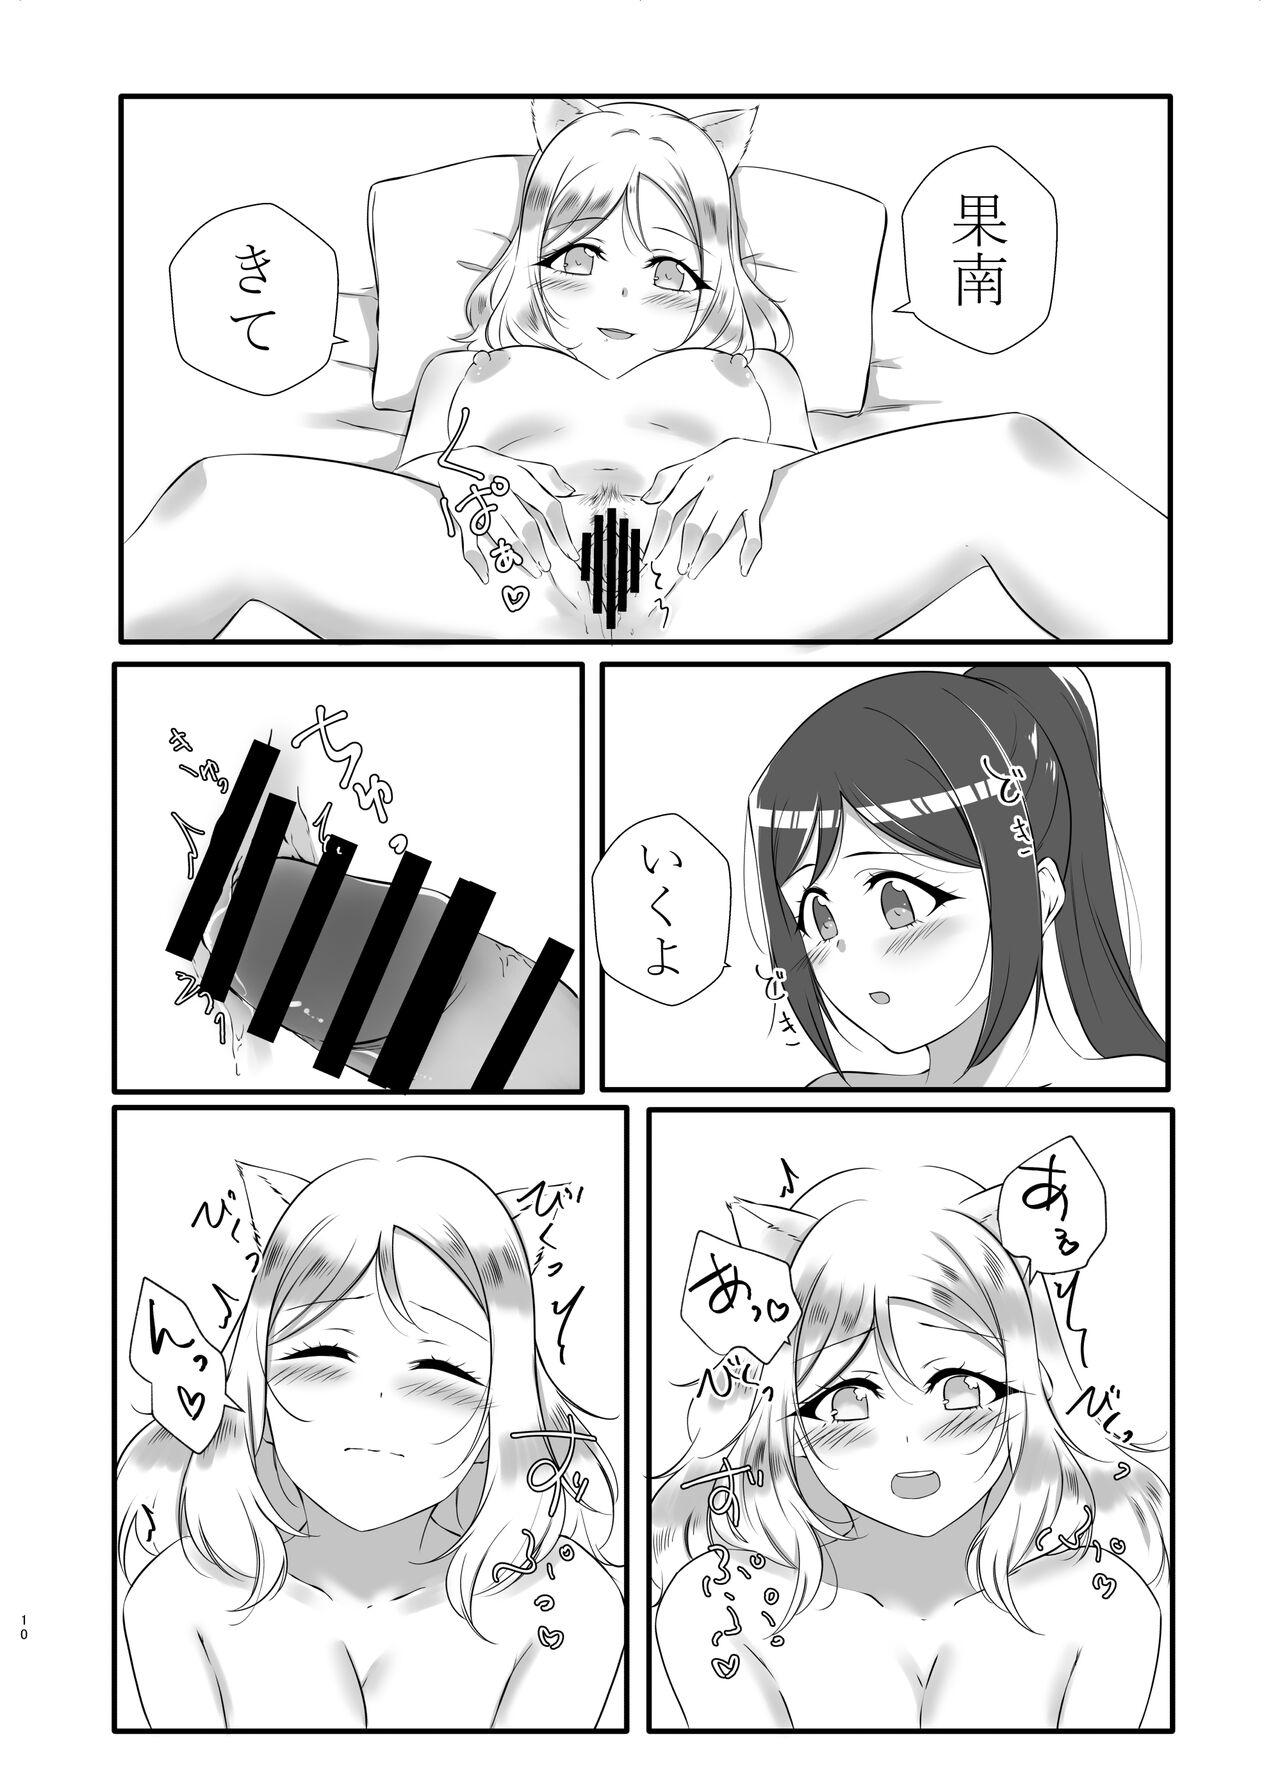 Bokep D.O.G ep. ZERO + D.O.G side.KANAN - Love live sunshine Gay Party - Page 7